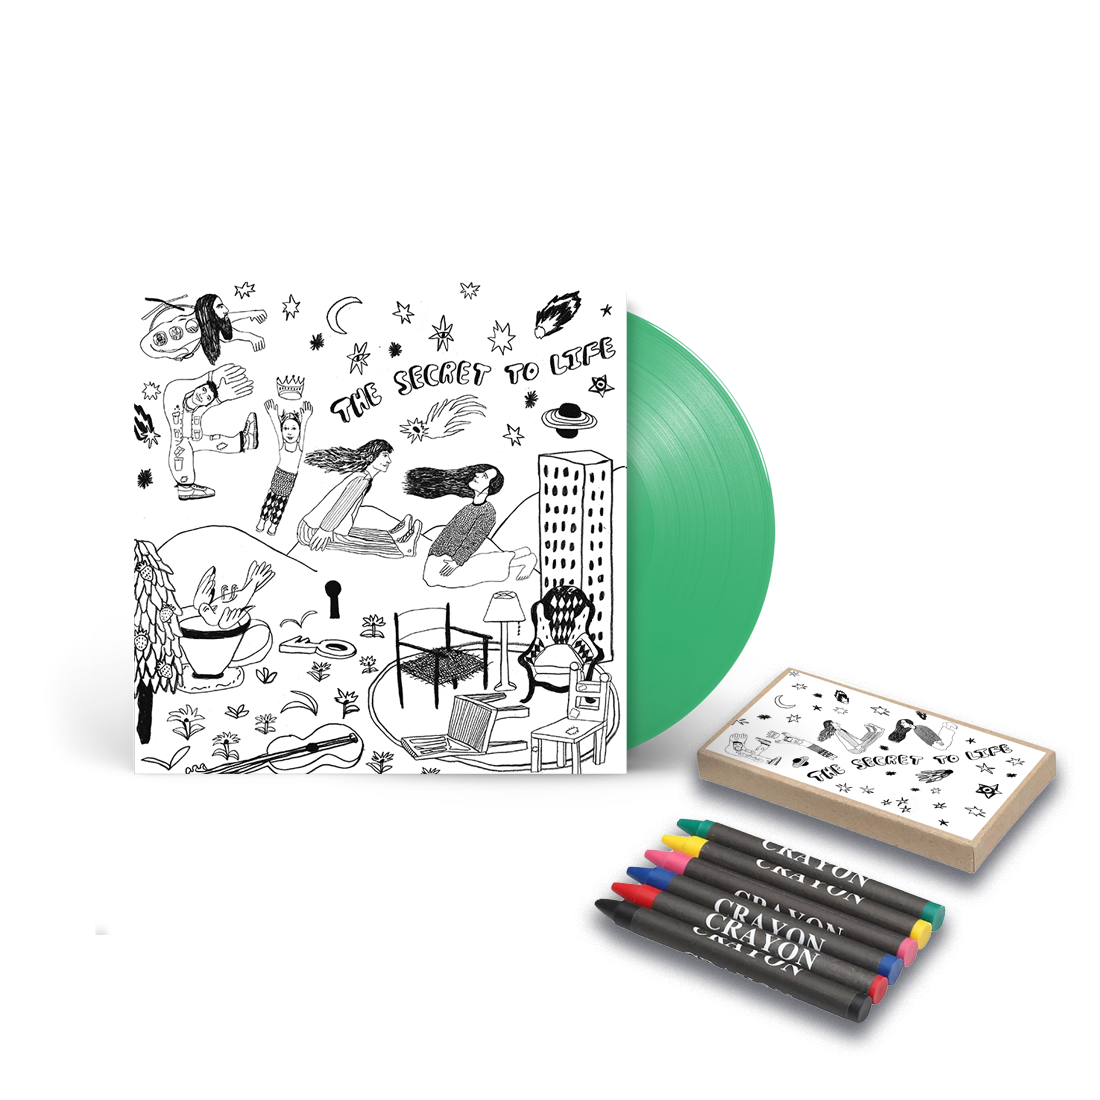 Exclusive The Secret to Life "Colour in" LP + crayons!